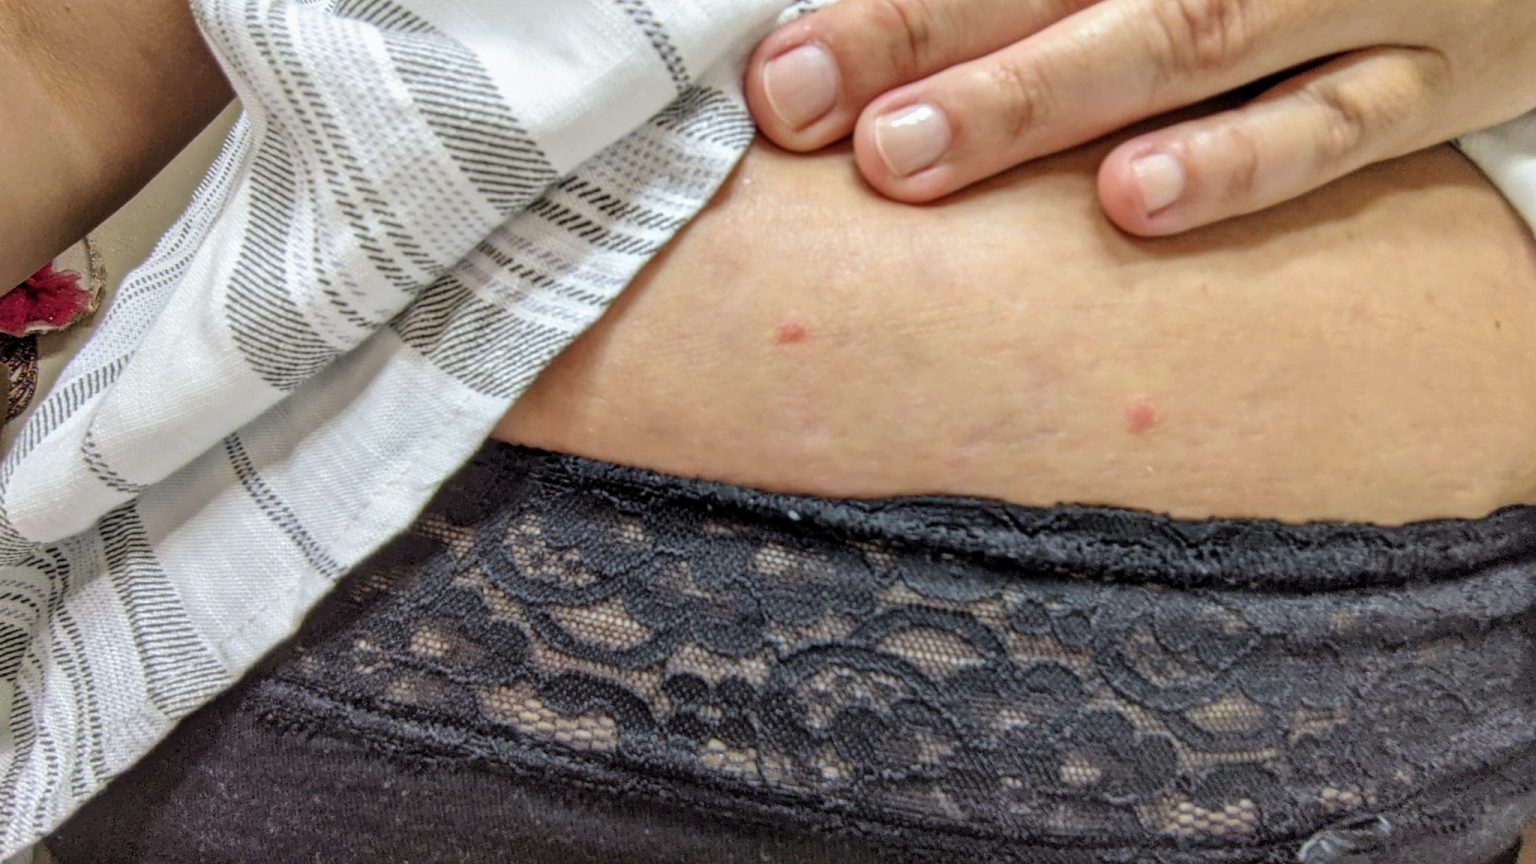 Guttate Psoriasis Coming Back (Pics and Story)